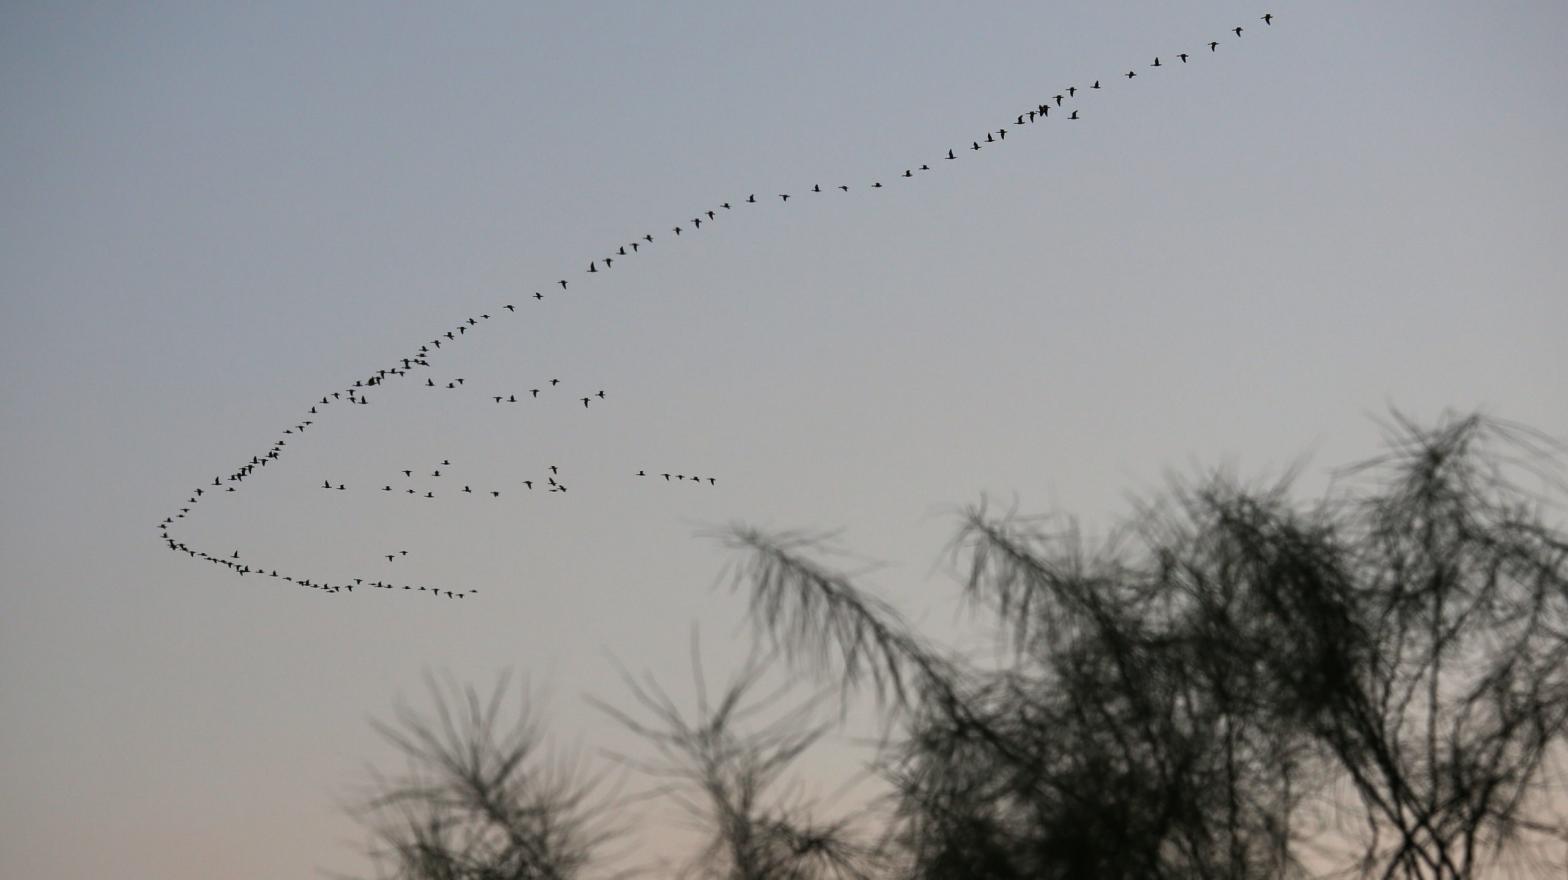 Migratory birds fly south over the U.S.-Mexico border (Photo: Getty)